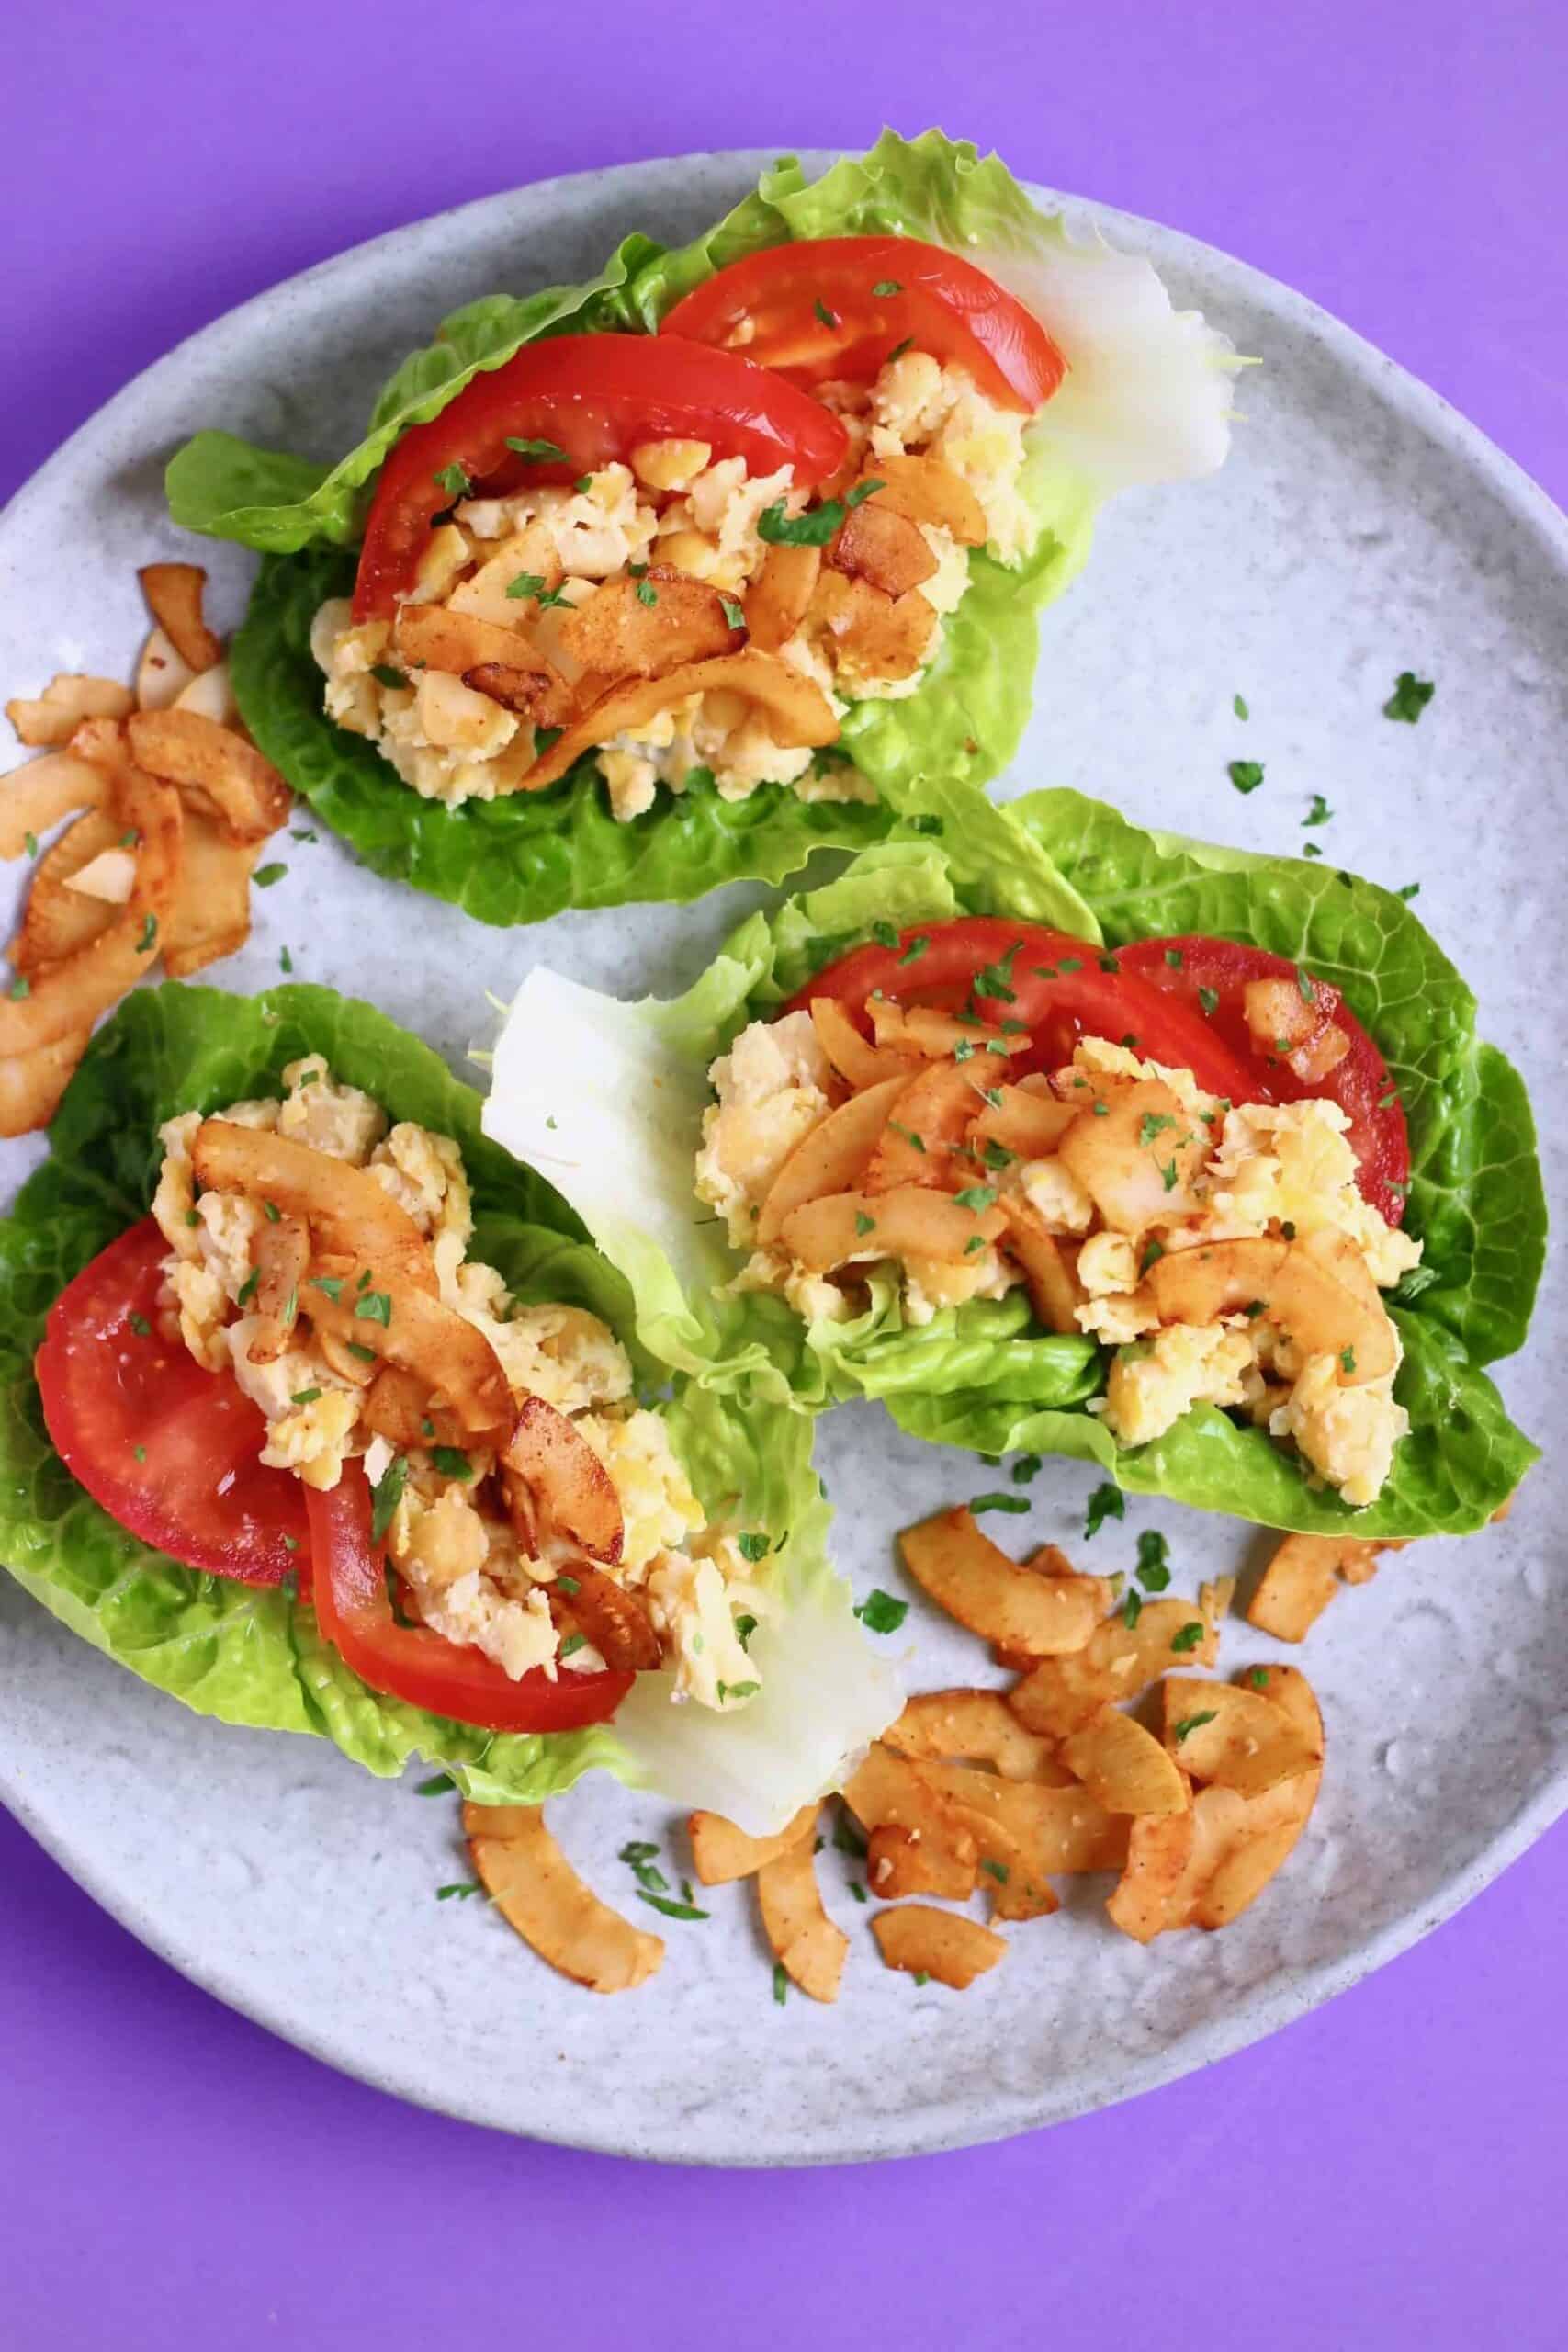 Three lettuce cups filled with creamy chickpeas, coconut bacon and tomatoes on a grey plate against a purple background